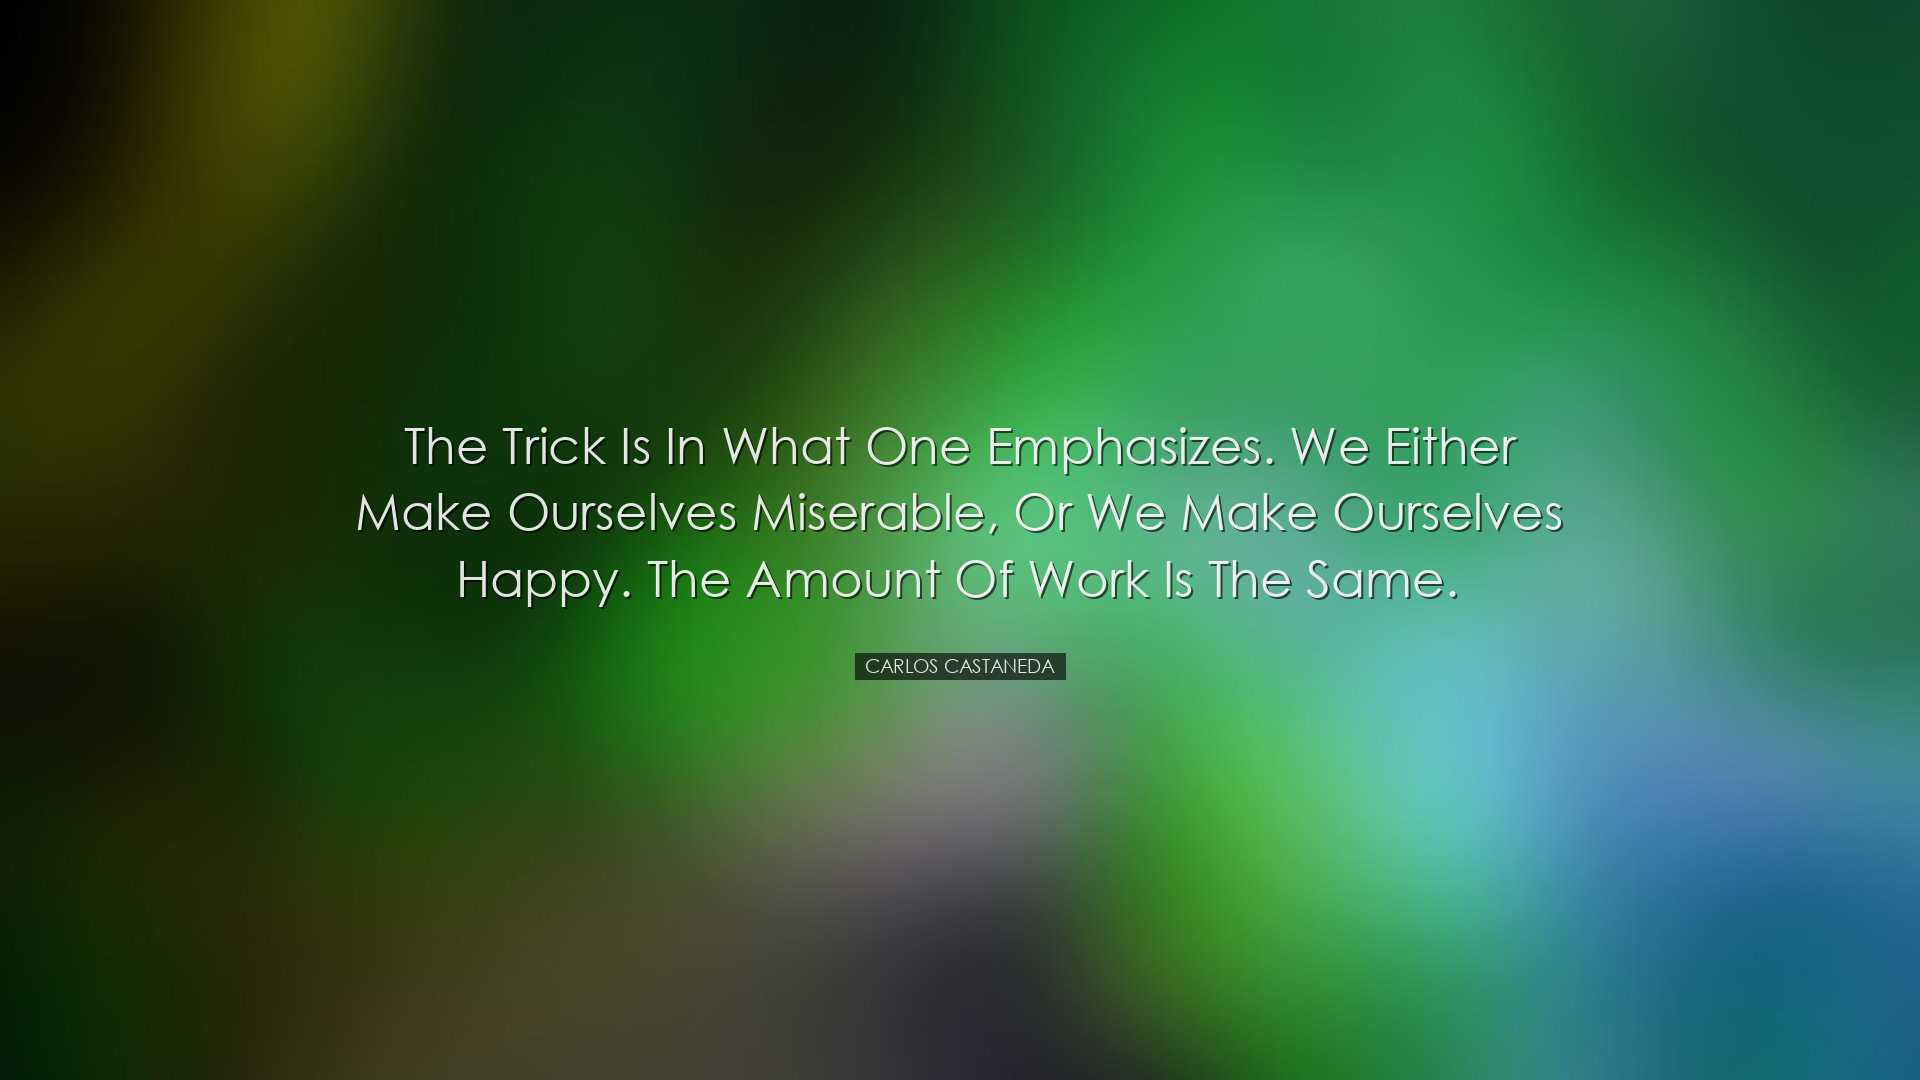 The trick is in what one emphasizes. We either make ourselves mise